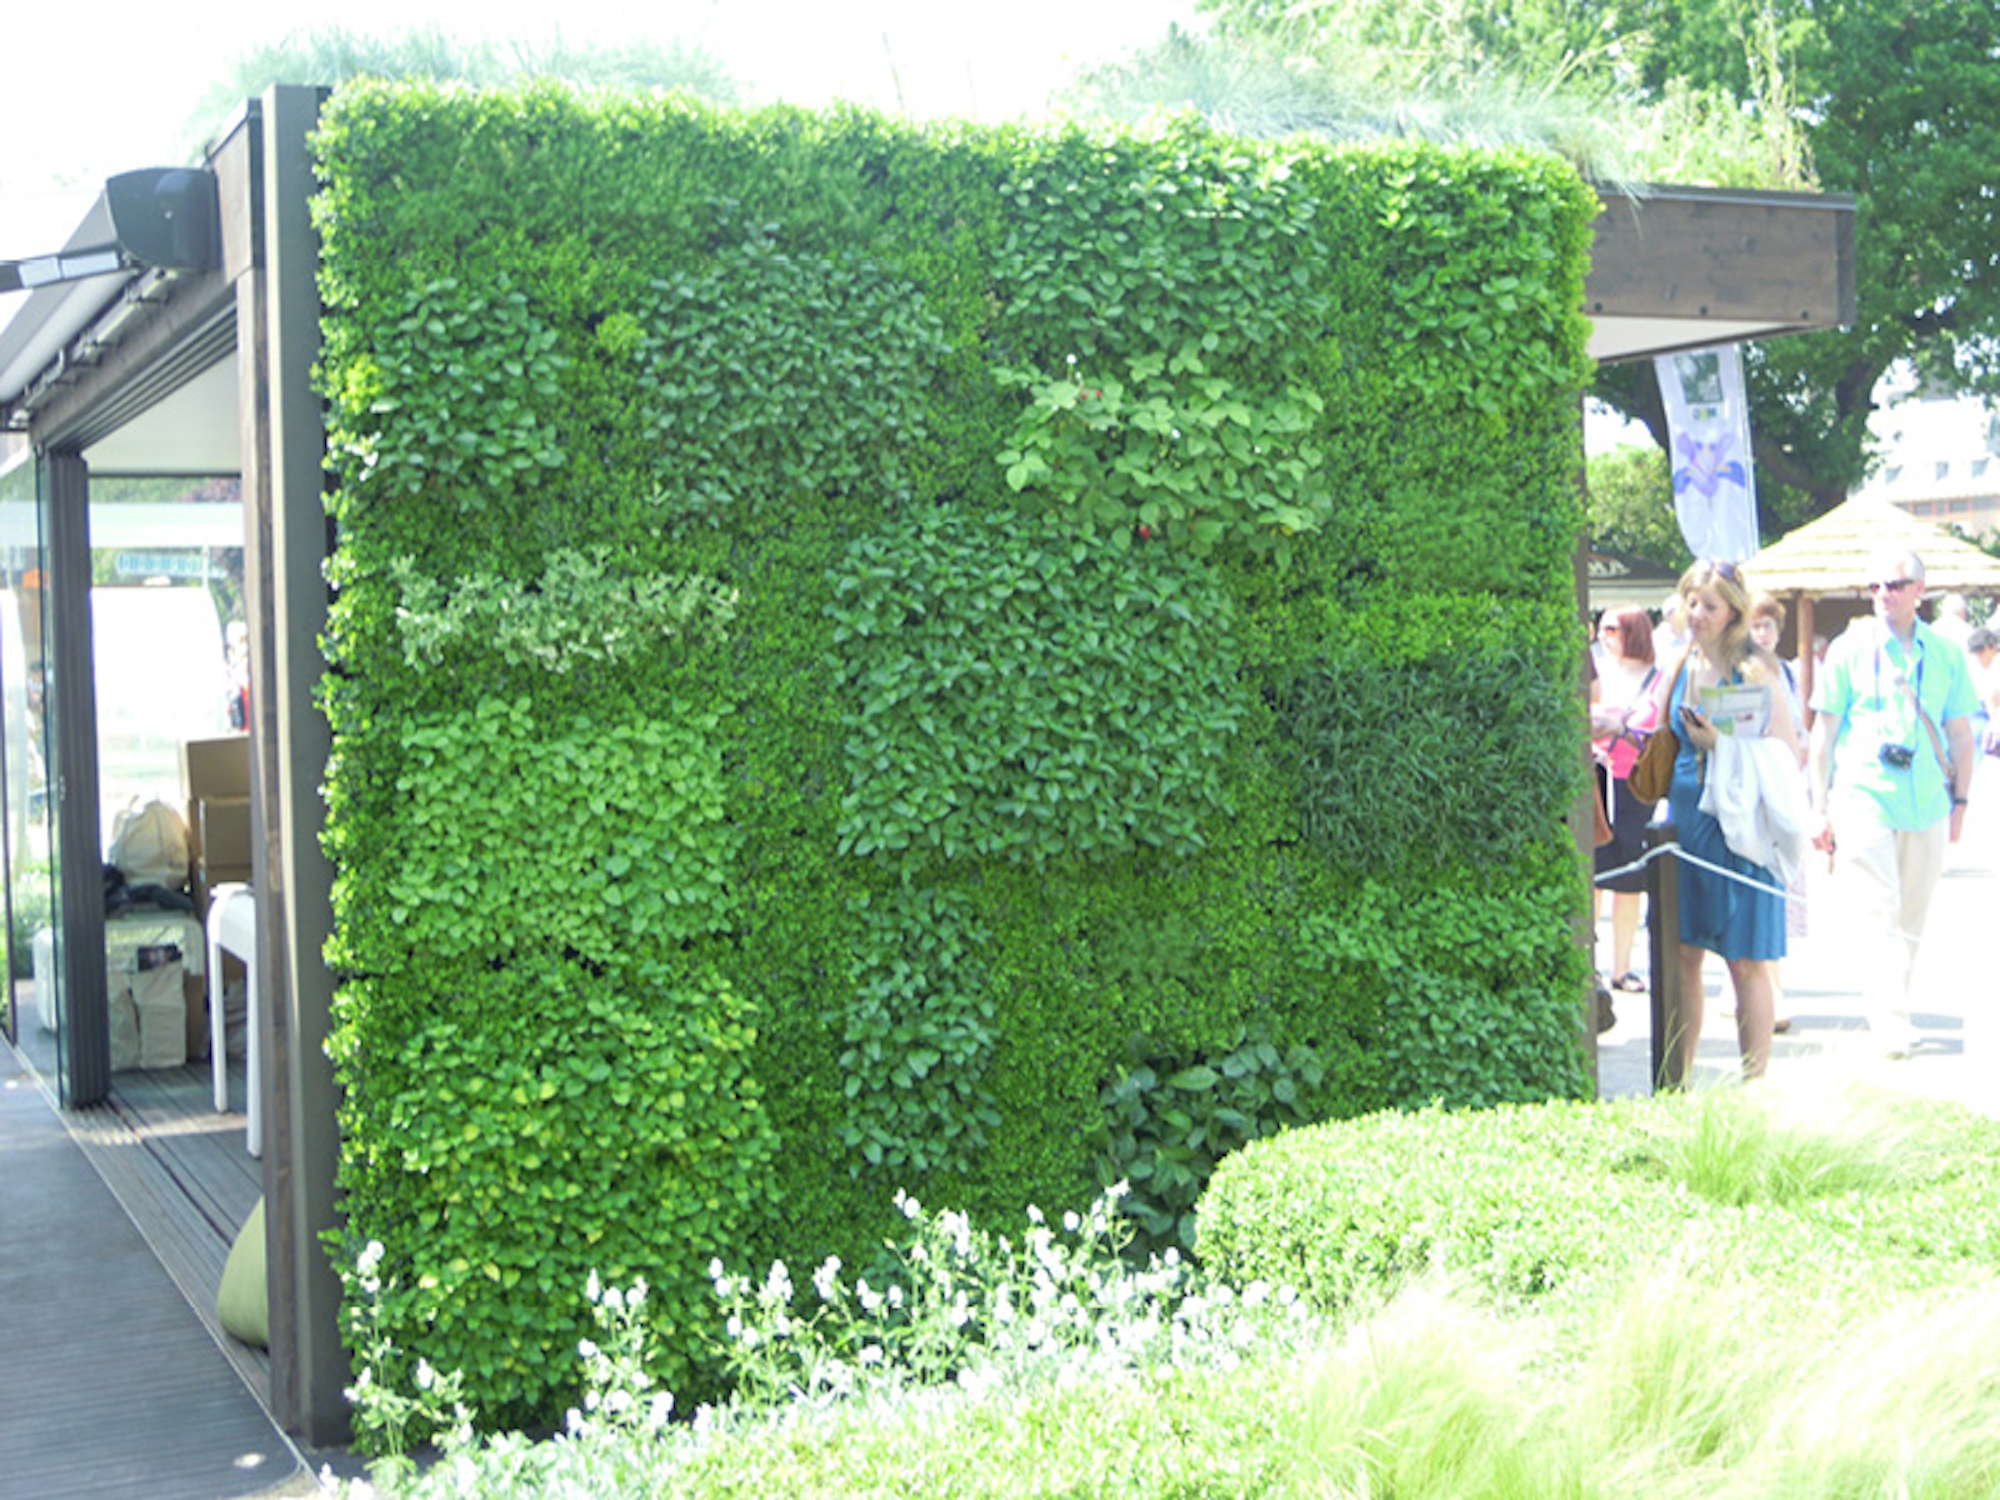 Living Wall at Chelsea Flower Show 2012